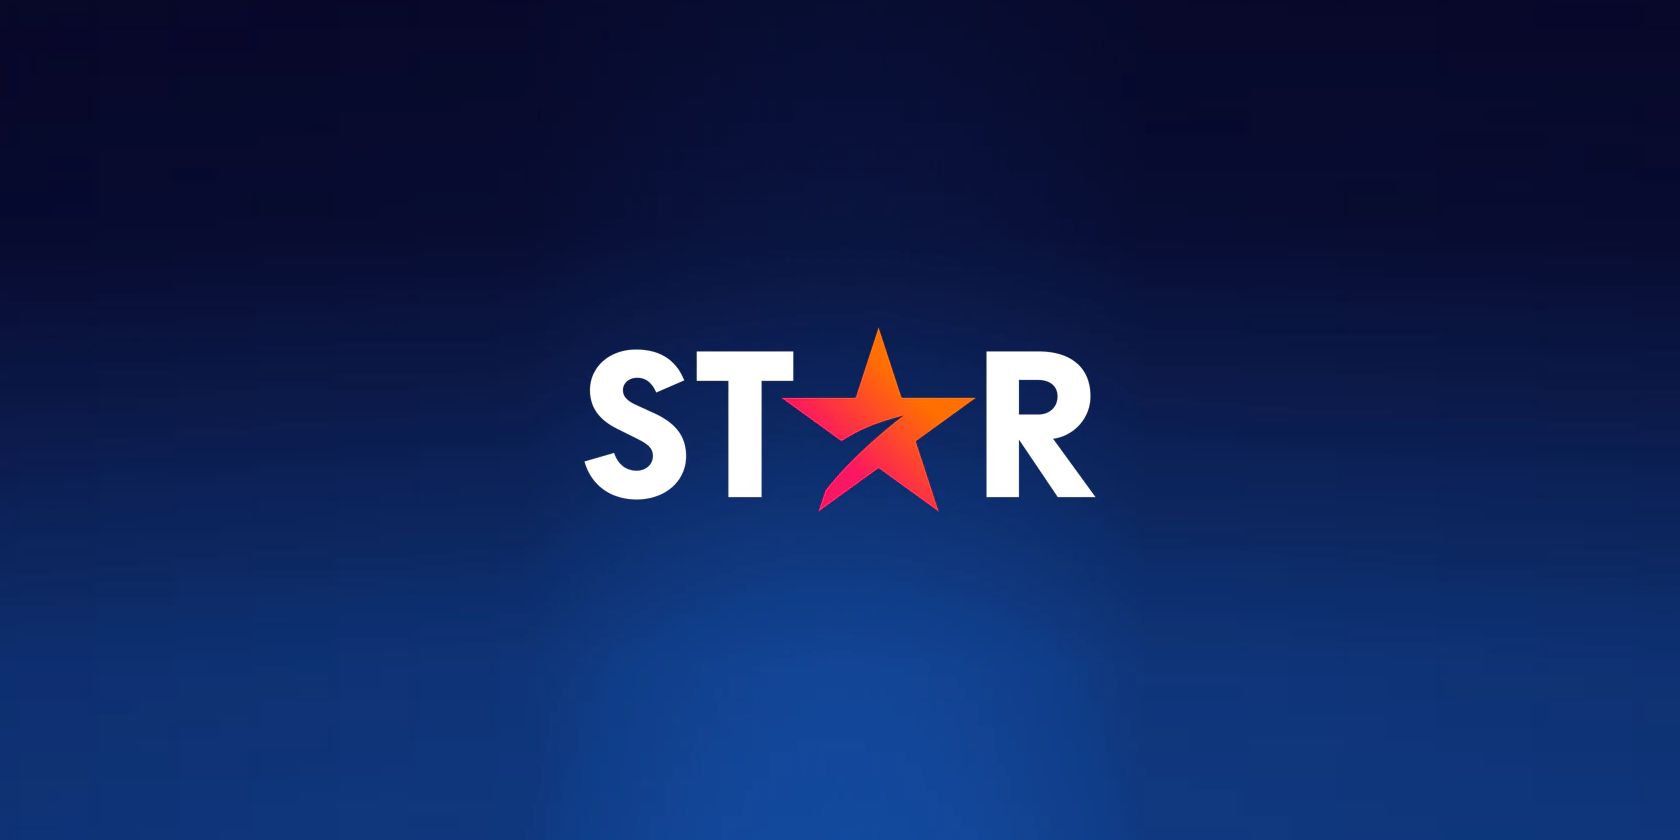 What Is Disney+ Star and Where Is It Available?